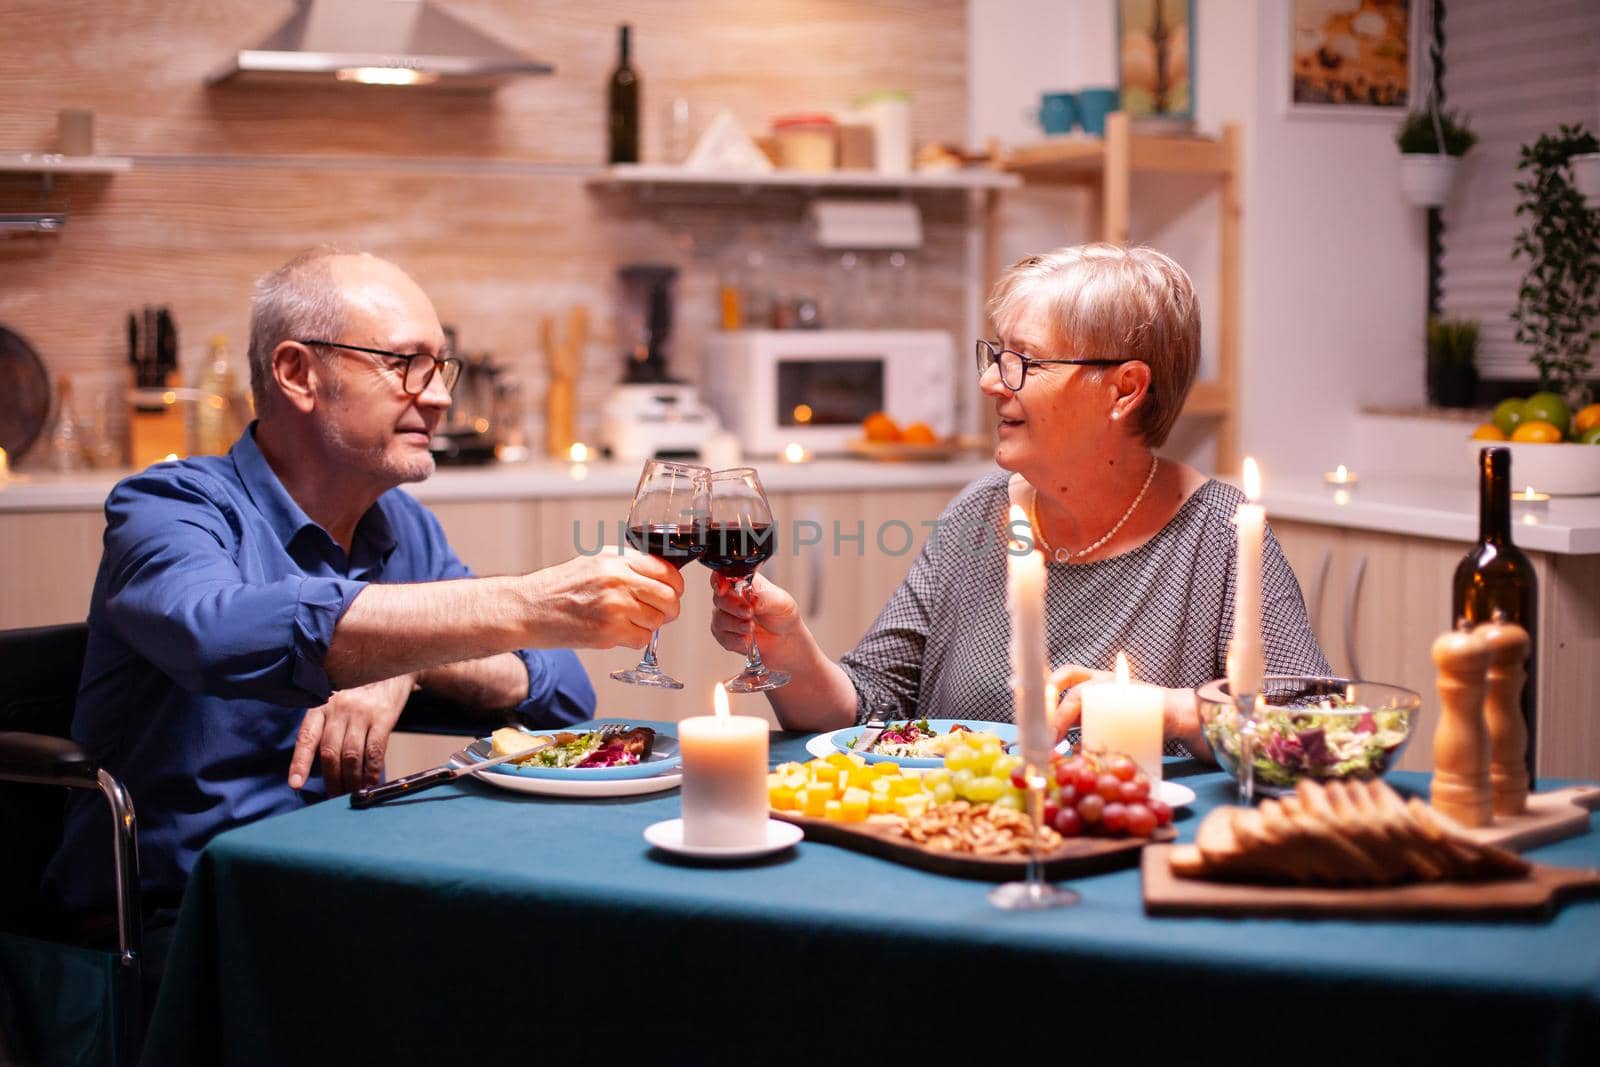 Man in wheelchair dining with wife and toasting using glasses with red wine. Wheelchair immobilized paralyzed handicapped man dining with wife at home, enjoying the meal